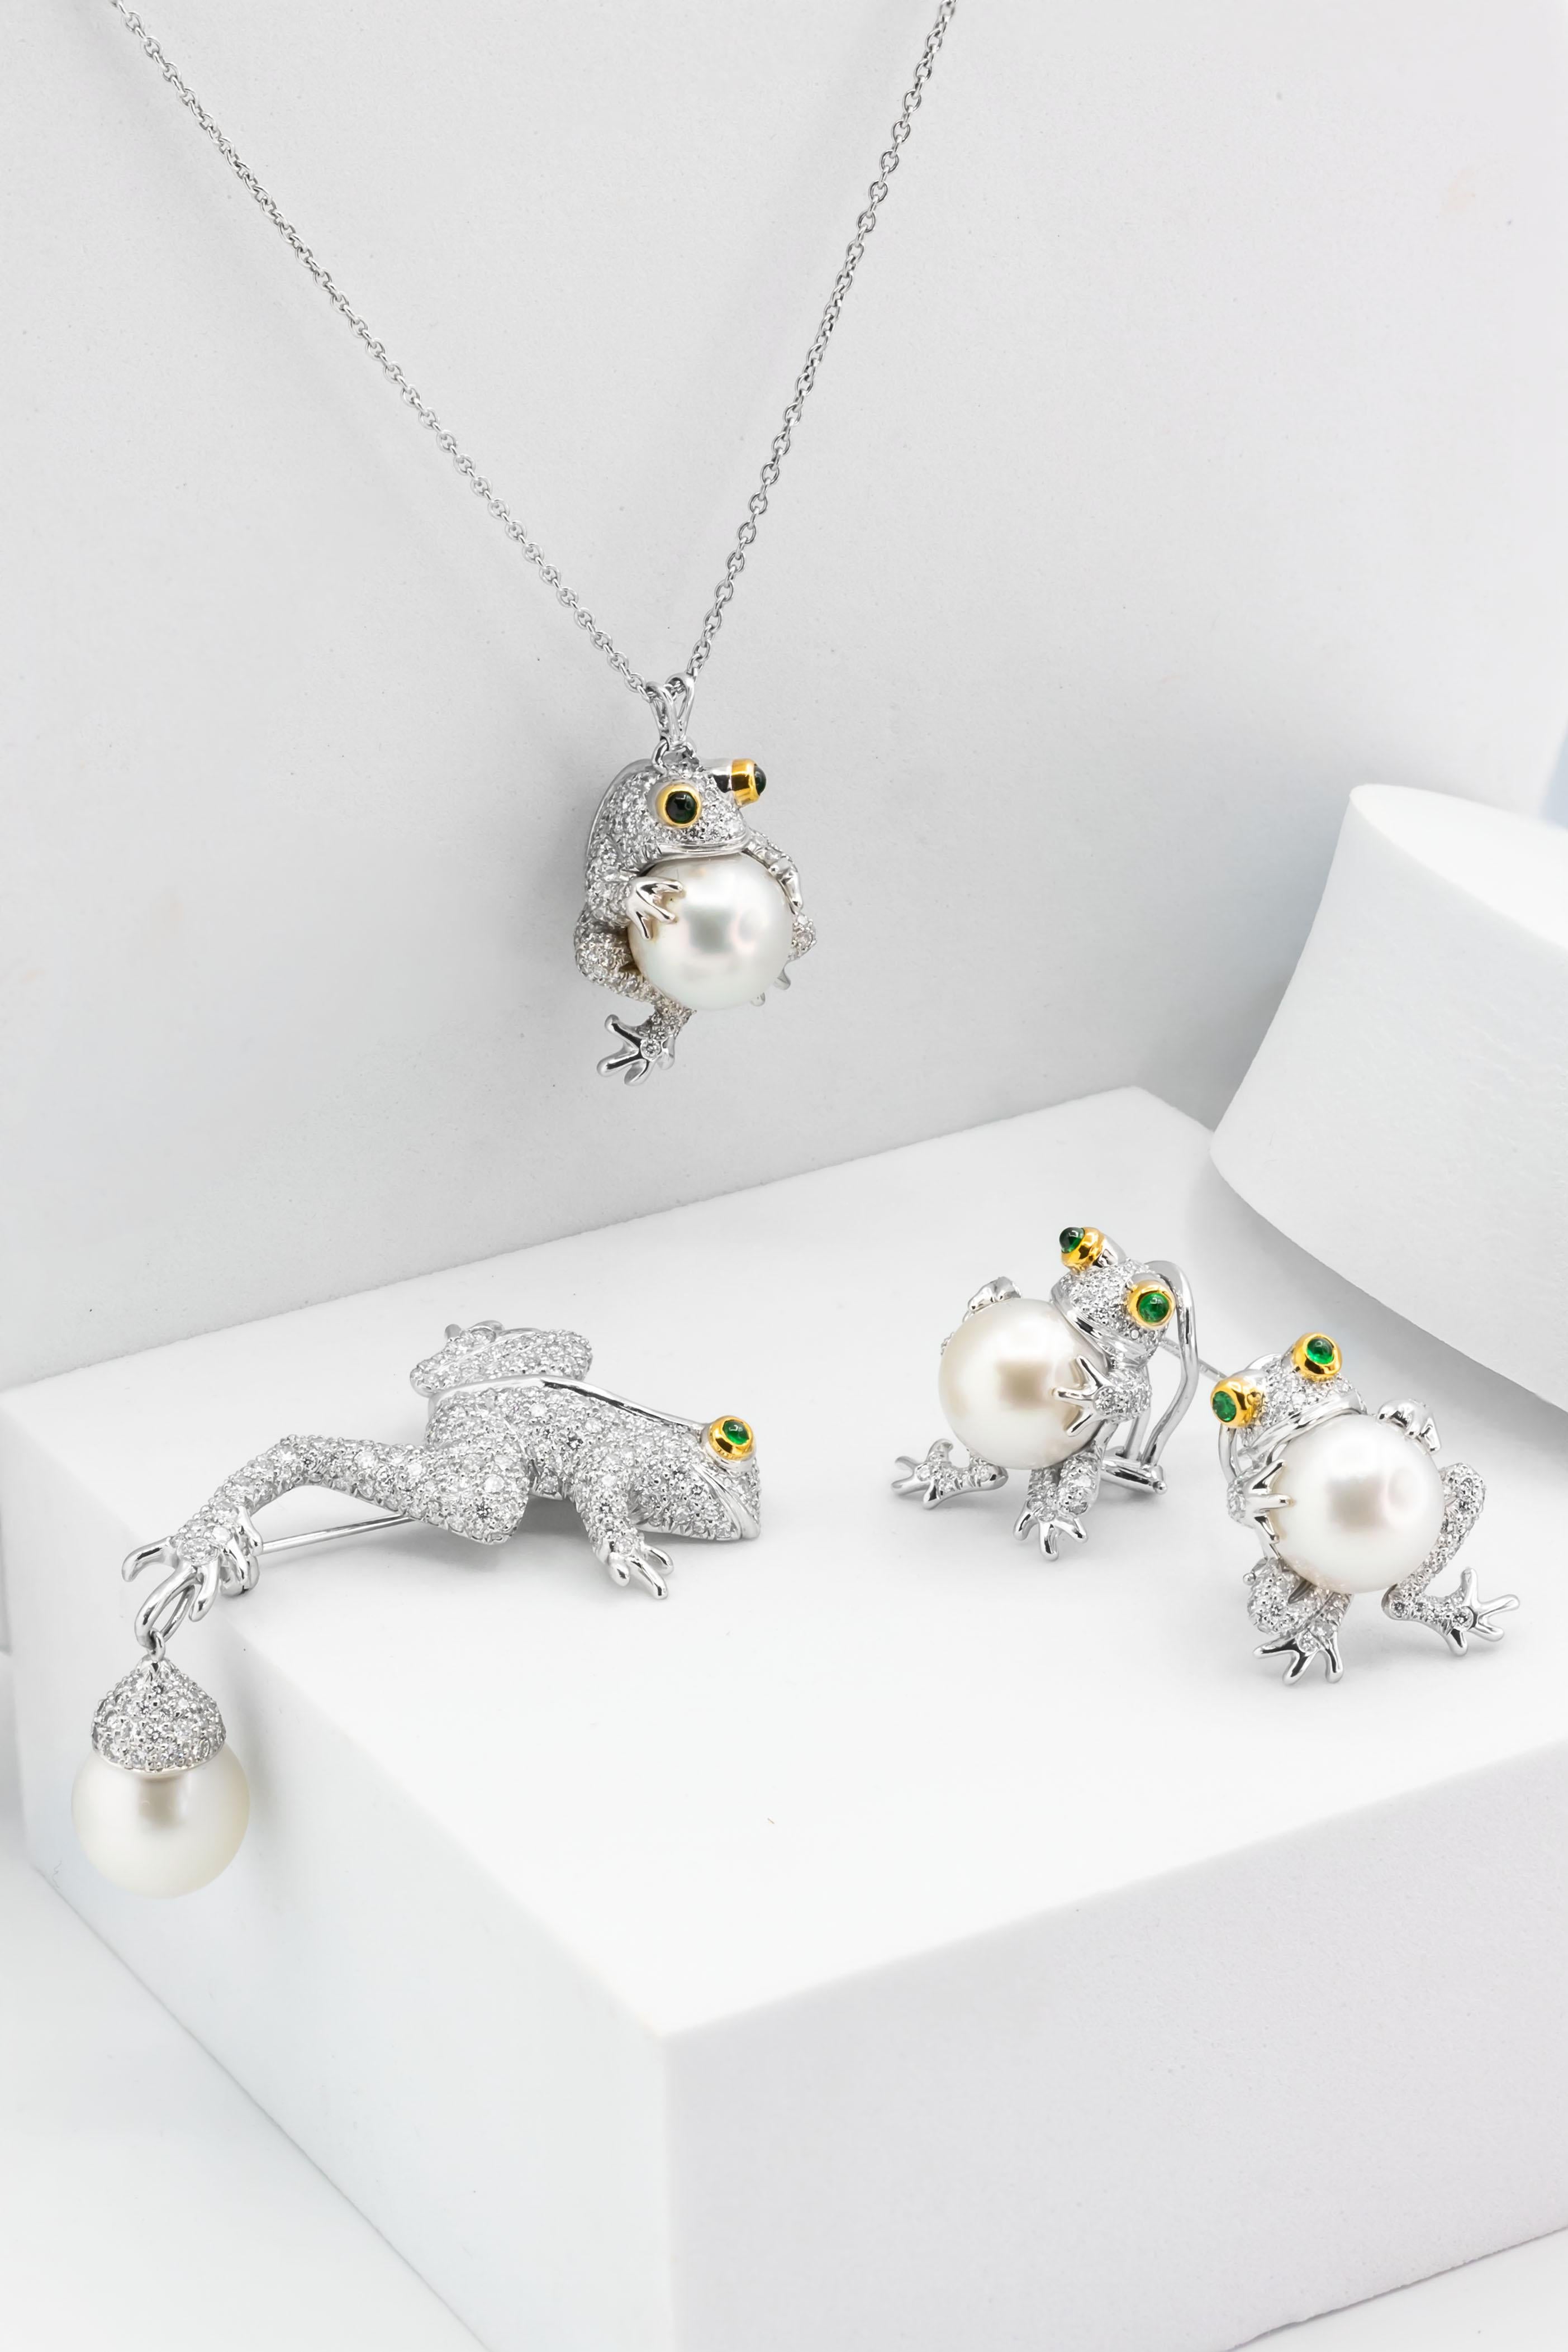 Beautiful and Whimsical Frog Set; each set with a South Sea Pearl enhanced with Diamond body and Emerald eyes. 
Late 20th century. Comes in black suede Tiffany & Co. case, Signed Tiffany & Co.

NECKLACE
Designed as a stylized frog pendant set with